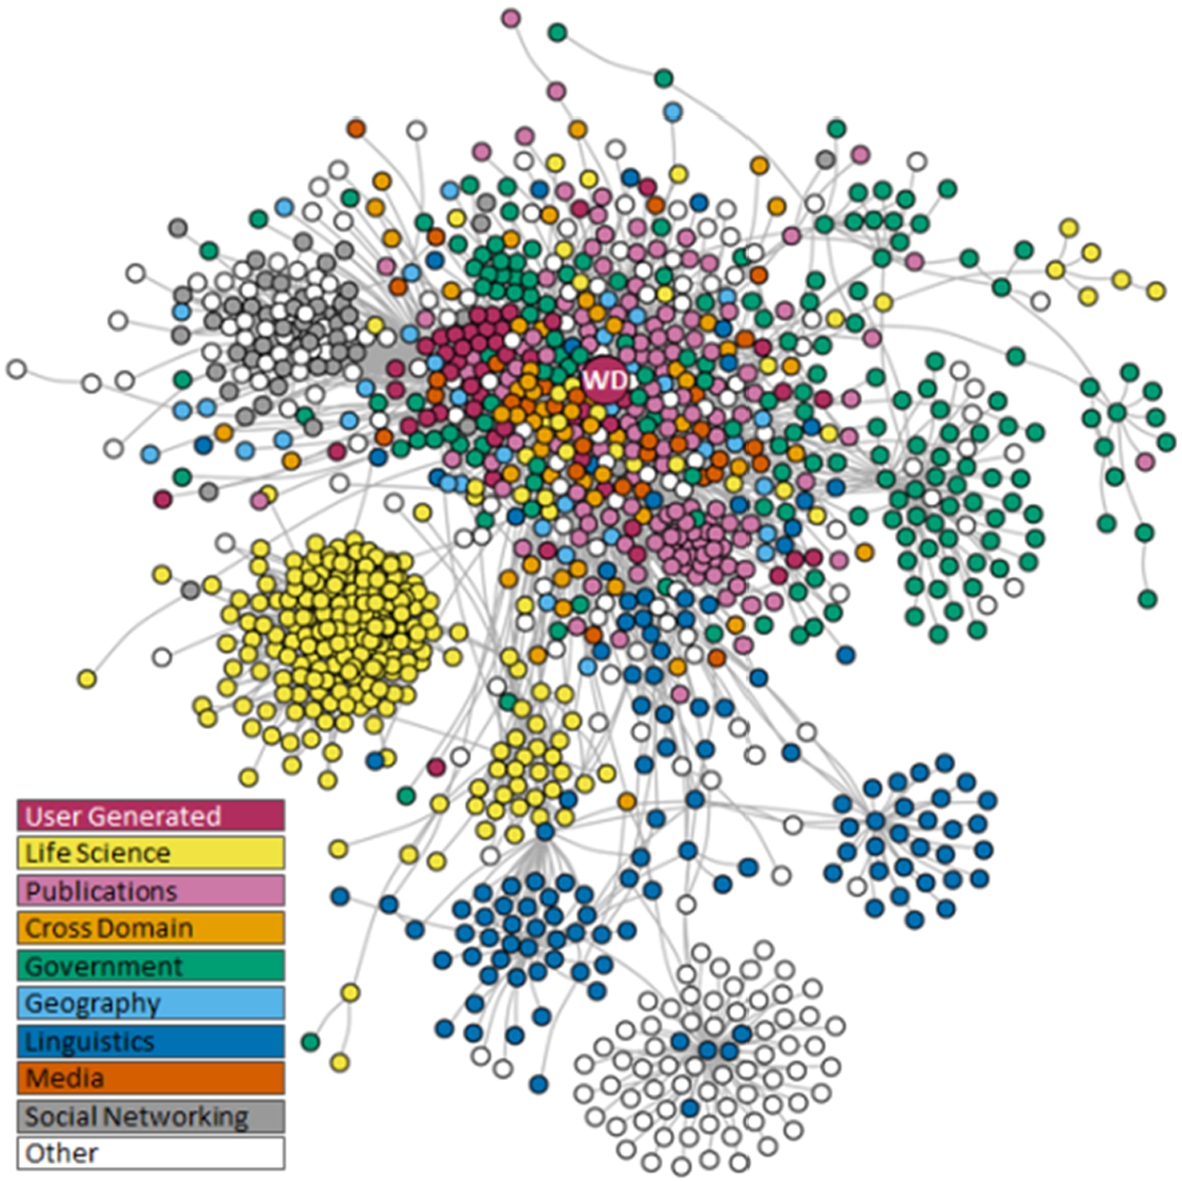 Wikidata in the Linked Open Data Cloud. Databases indicated as circles (with Wikidata indicated as ‘WD’), with grey lines linking databases in the network if their data is aligned, source dataset last updated May 2020 (available at: https://w.wiki/bYM, license: CC BY 4.0).